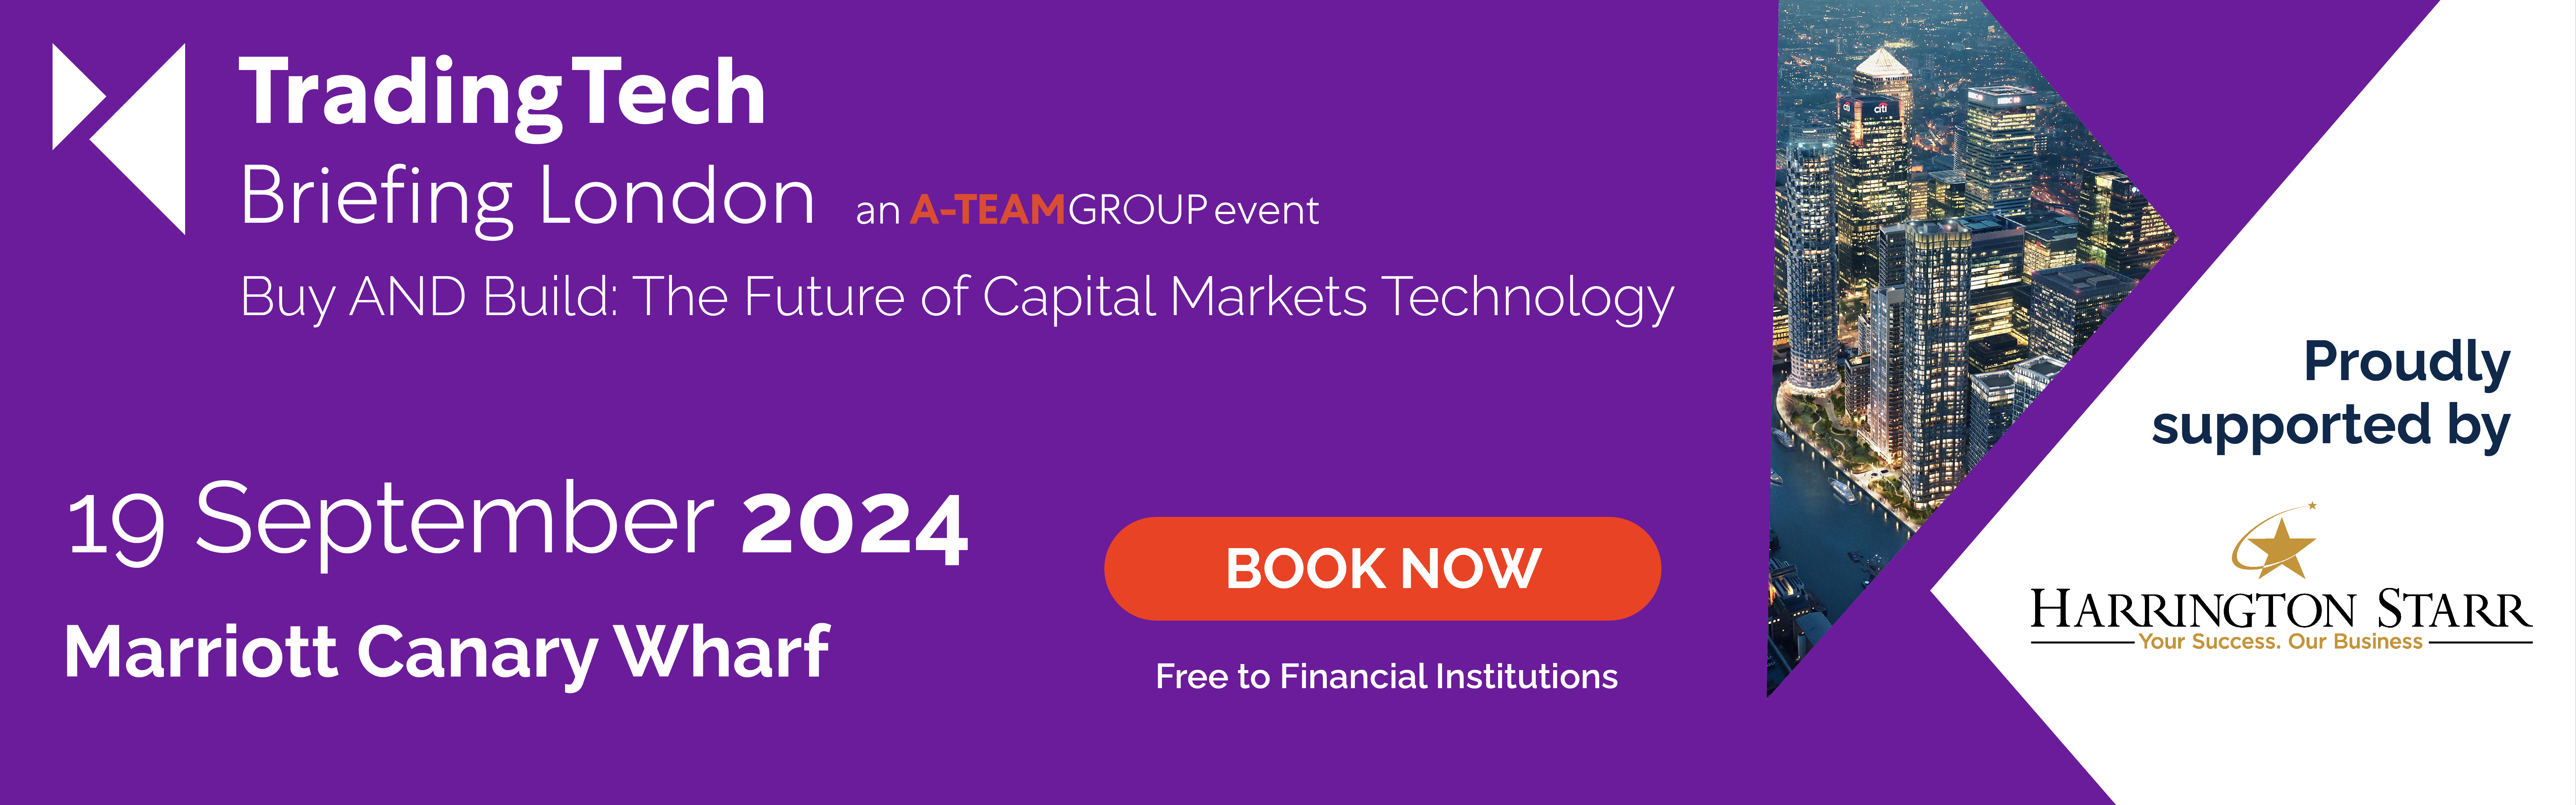 Buy AND Build: The Future of Capital Markets Technology, London